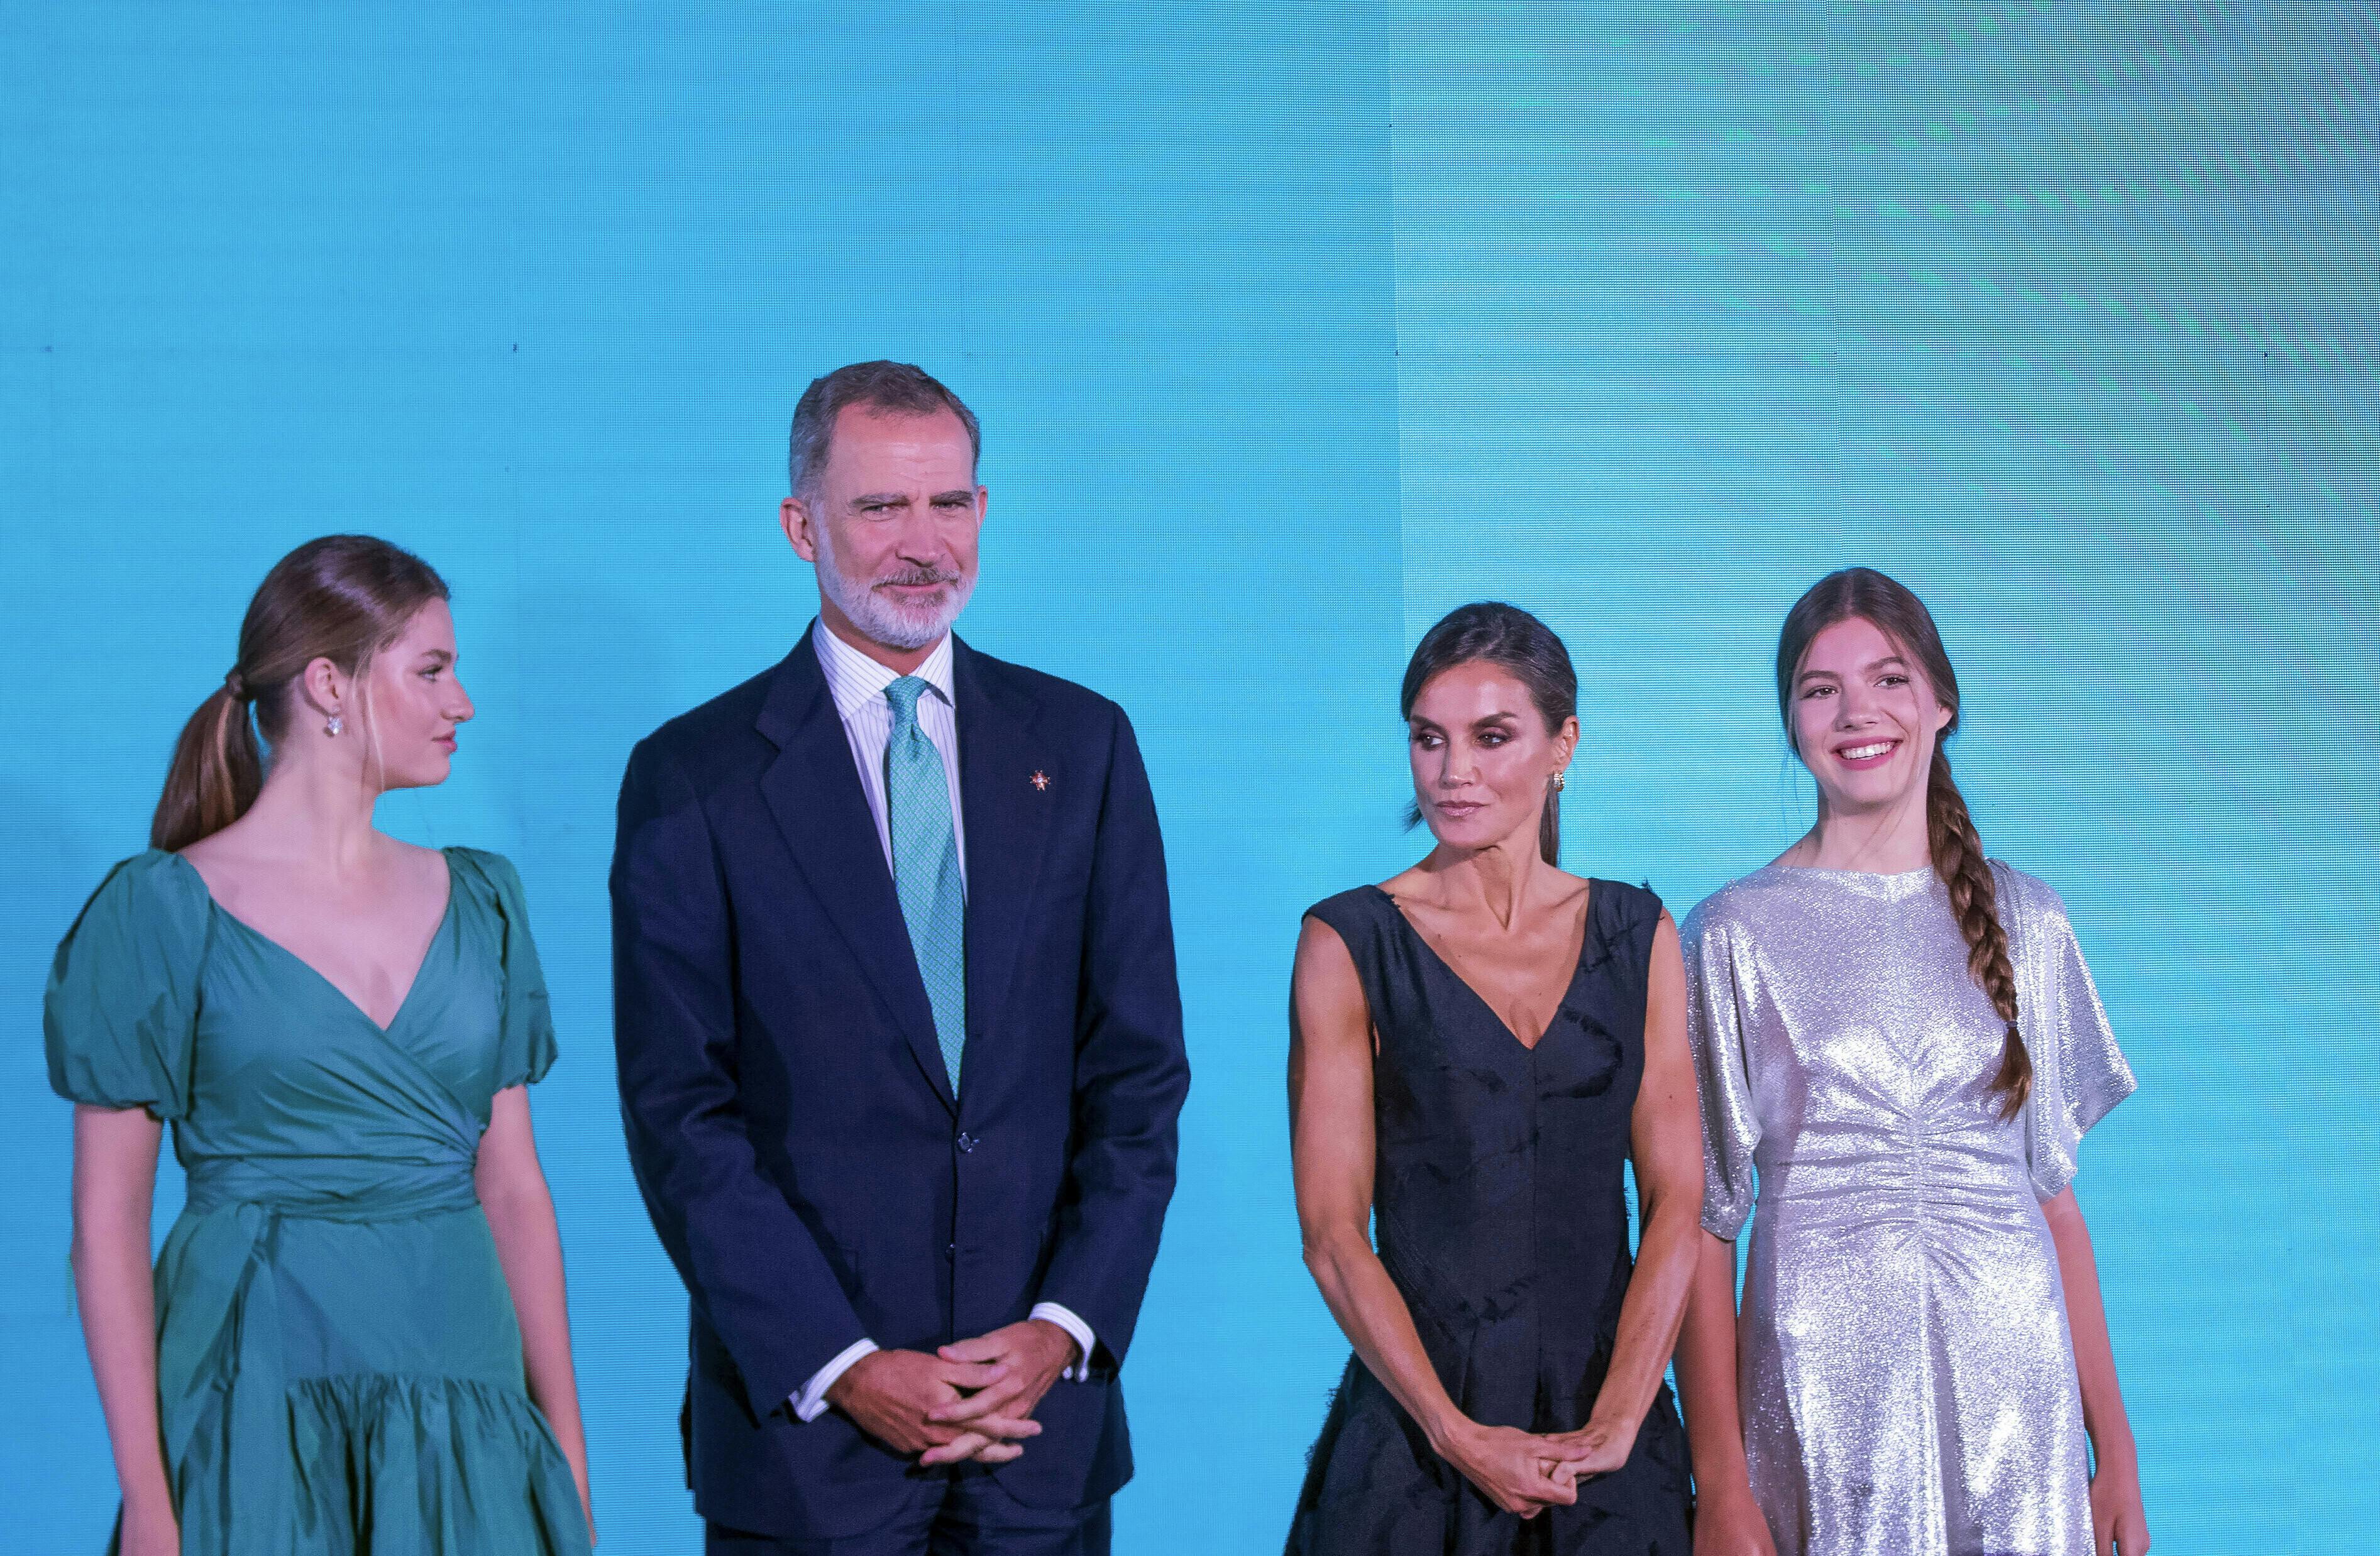 King Felipe, Queen Letizia, Princess Leonor and Princess Sofia of Spain at Hotel Camiral in Caldes de Malavella, on July 05, 2023, to attend the 2023 Princess of Girona Awards ceremony Photo by: Albert Nieboer/picture-alliance/dpa/AP Images